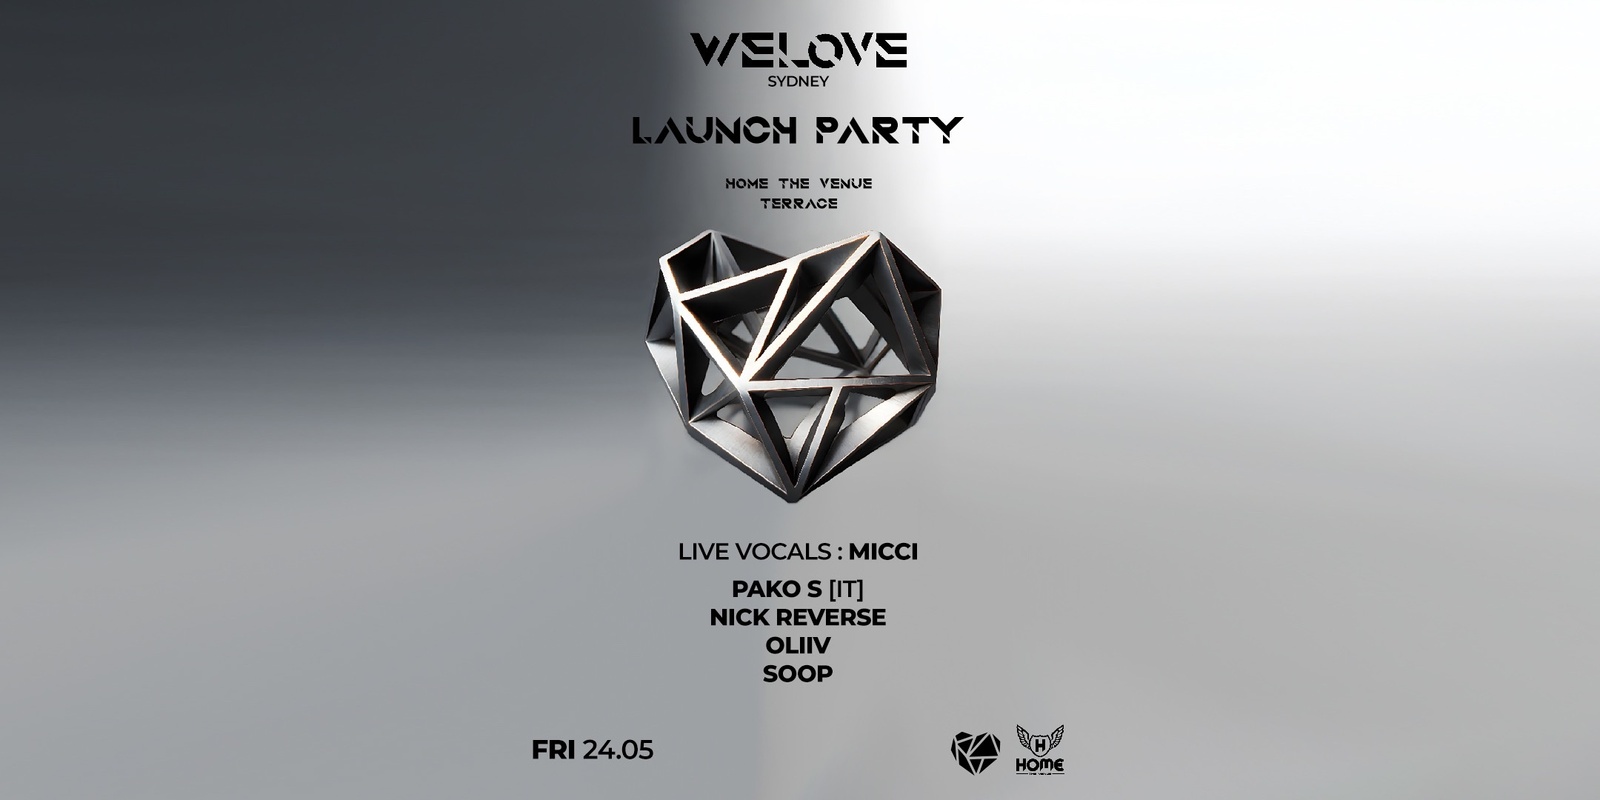 Banner image for WeLove Sydney Launch Party | Home The Venue